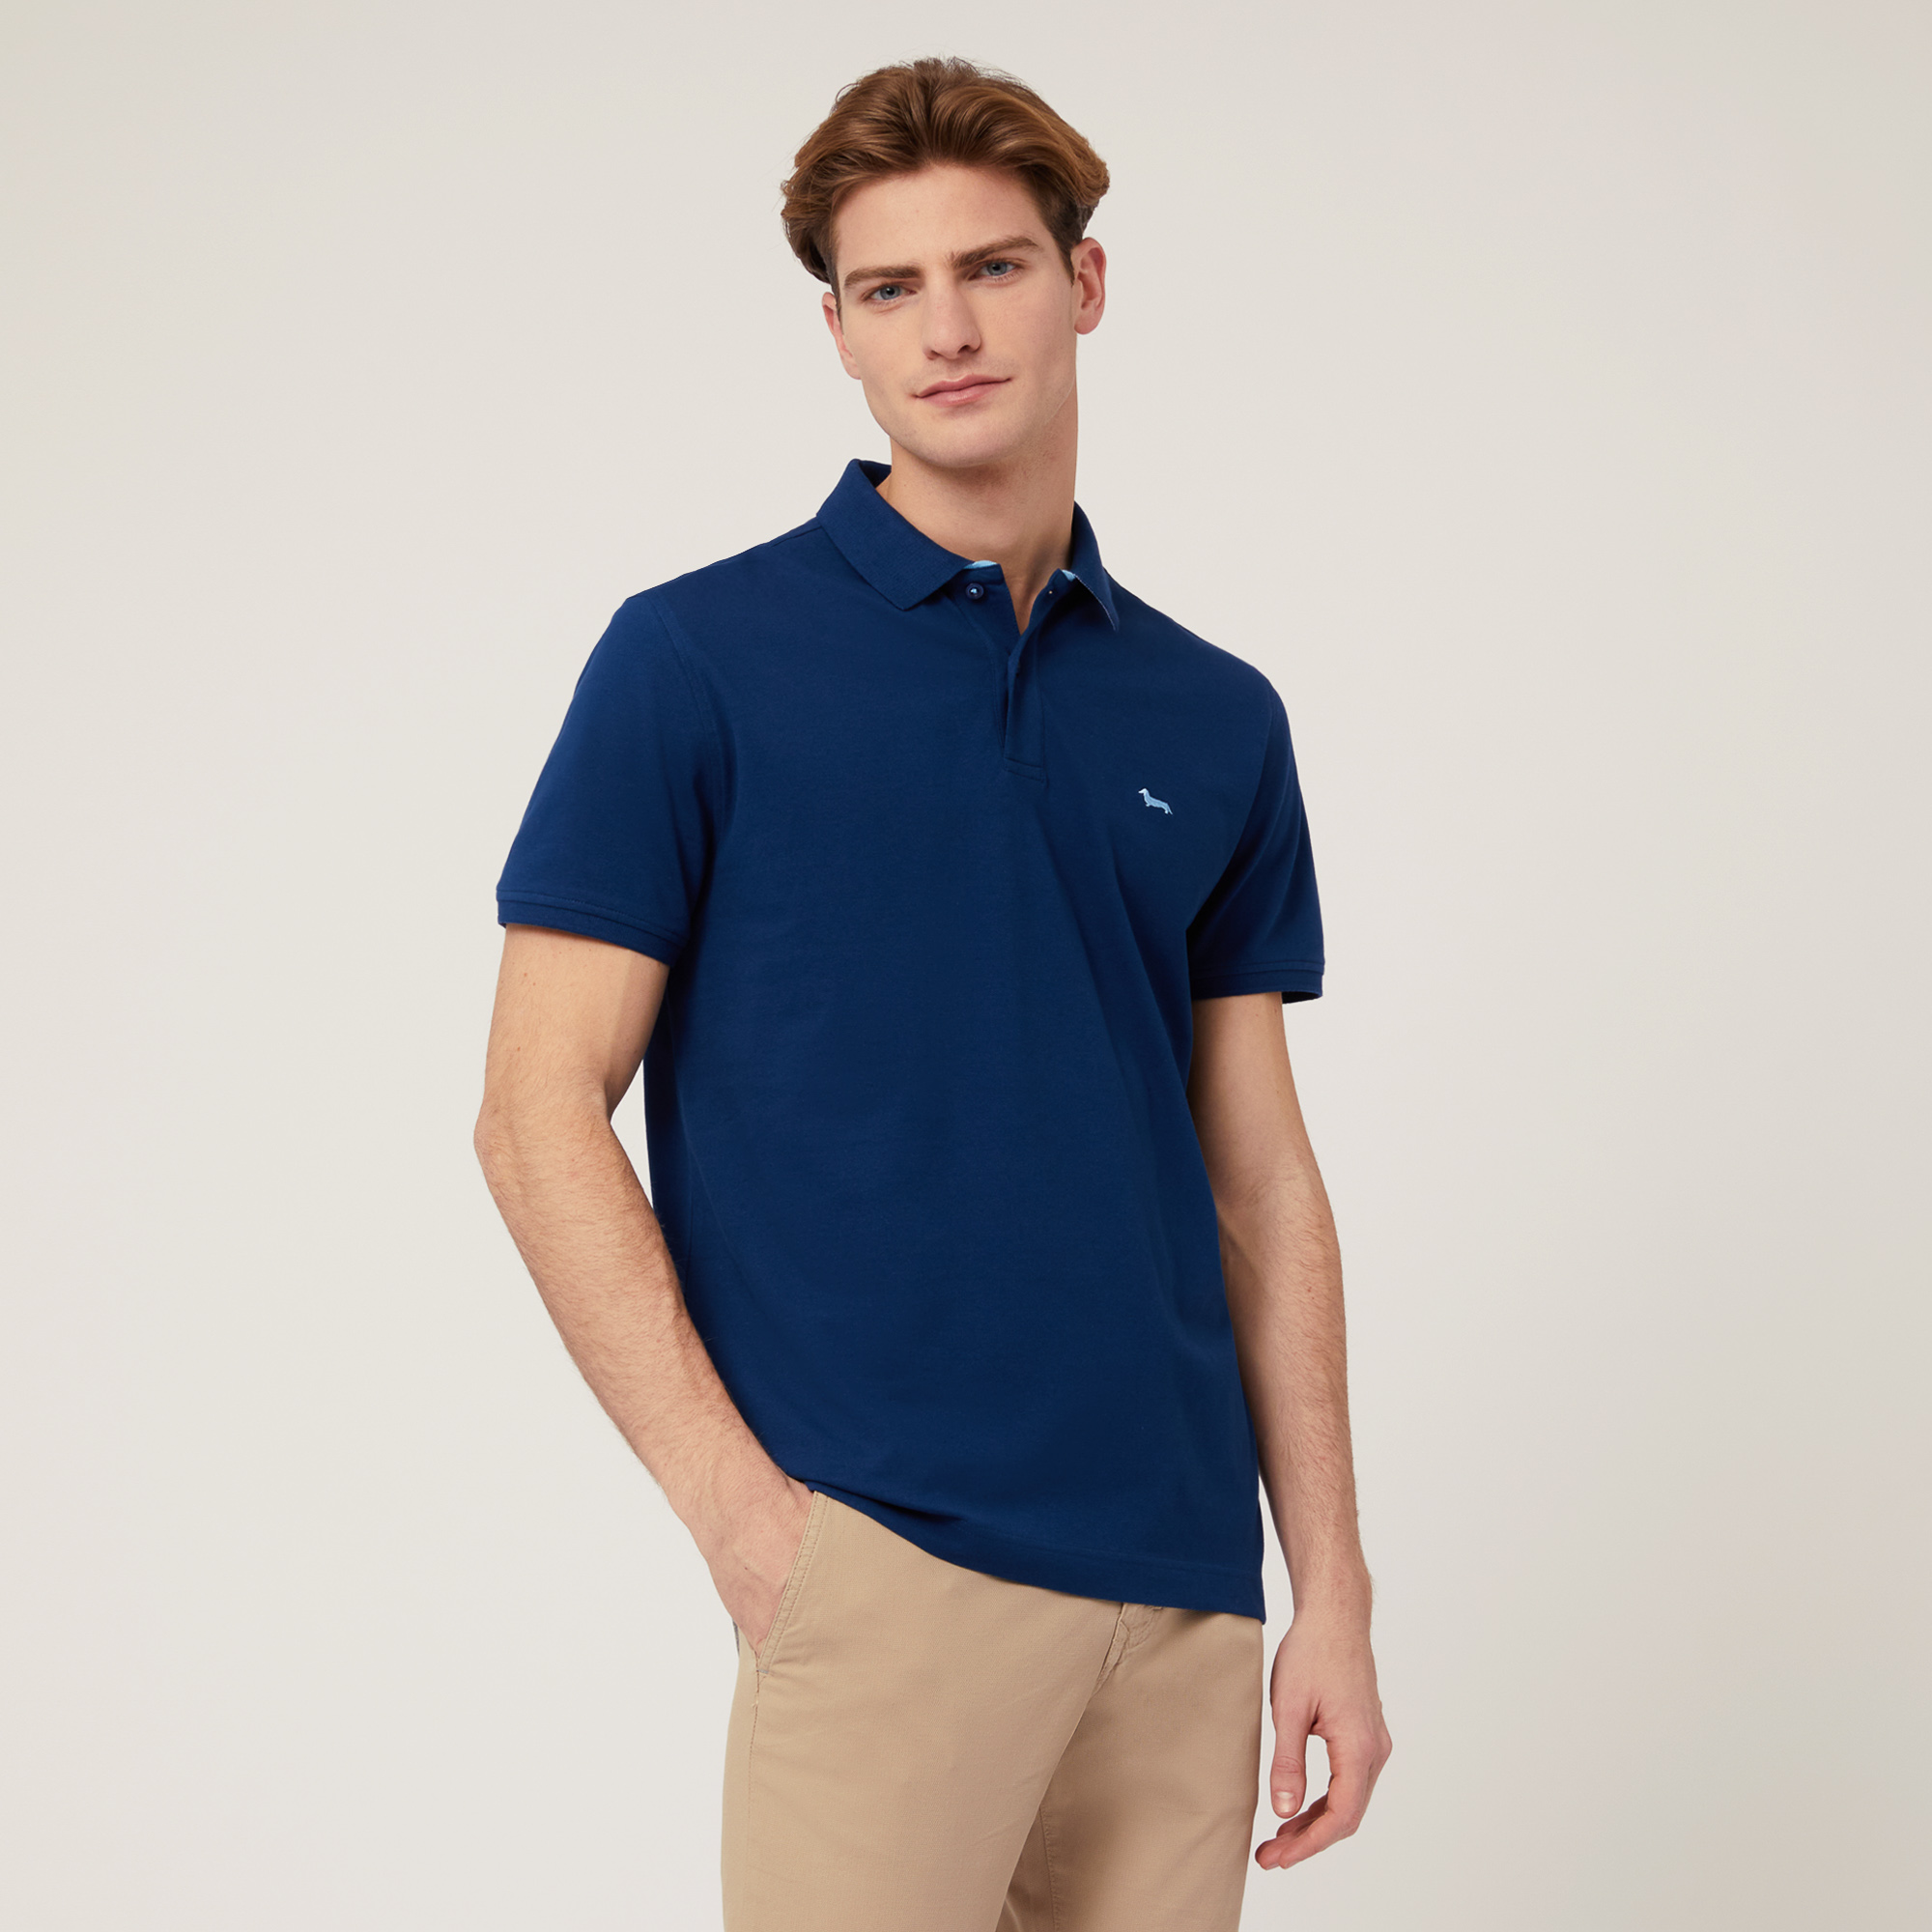 Ribbed Polo with Collar, Light Blue, large